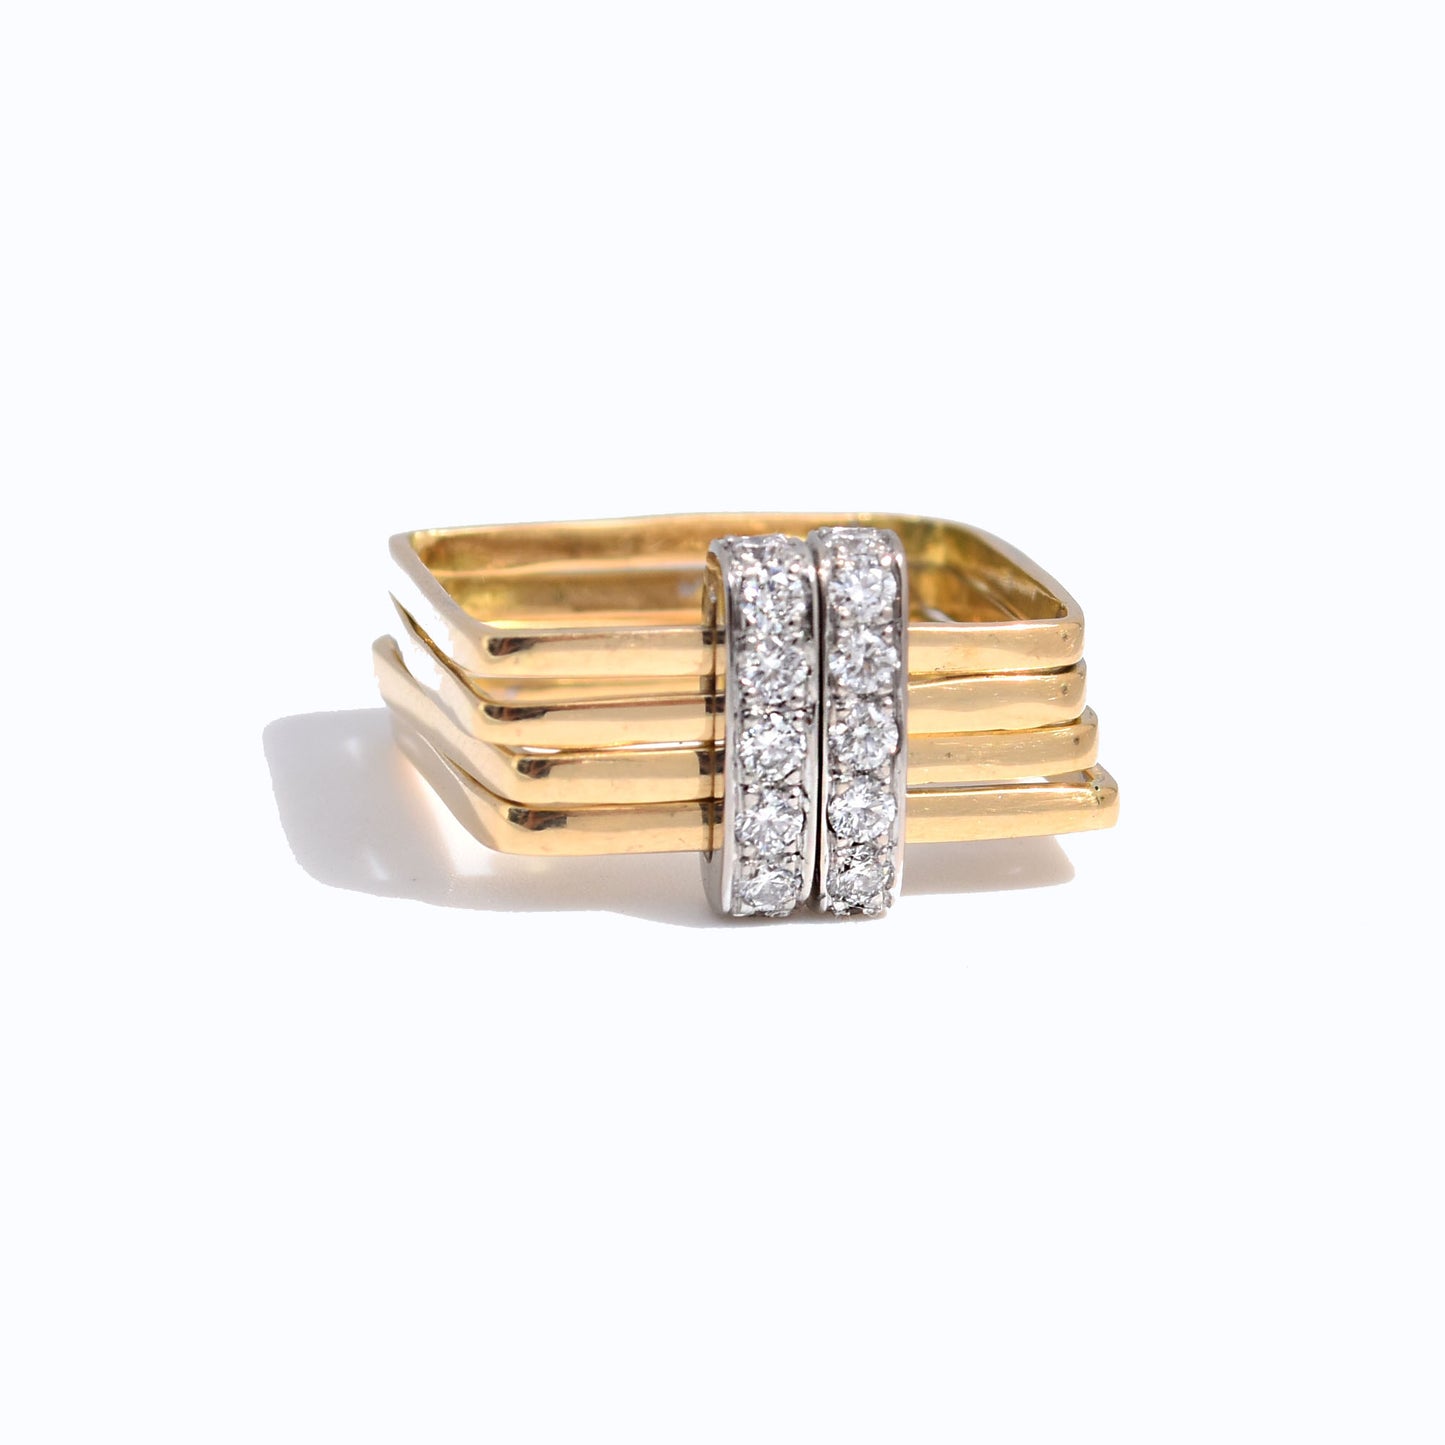 Firenze Ring - Two Tone 18K Gold Double Pave Diamond Bar